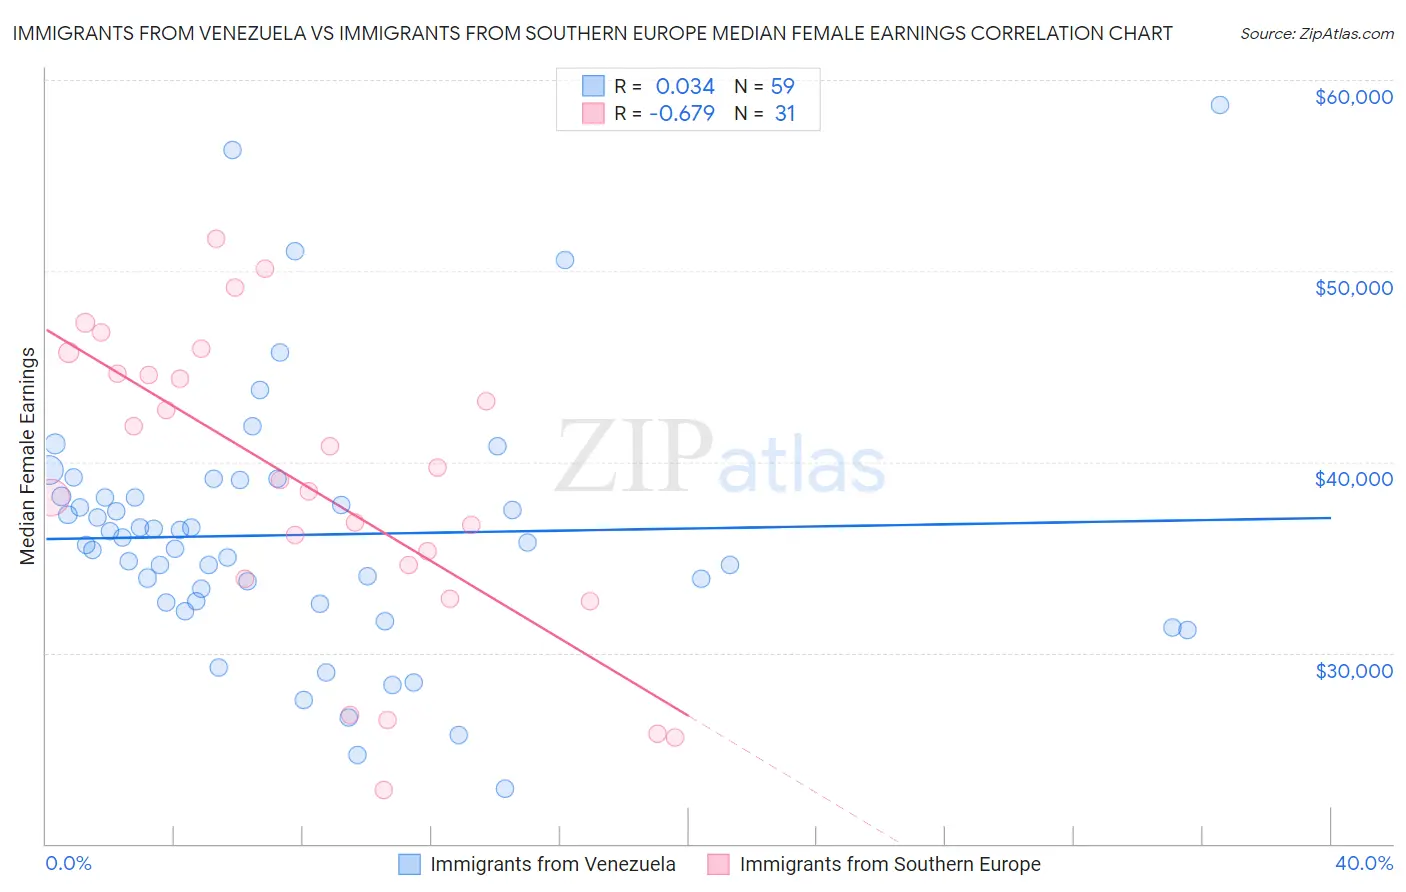 Immigrants from Venezuela vs Immigrants from Southern Europe Median Female Earnings